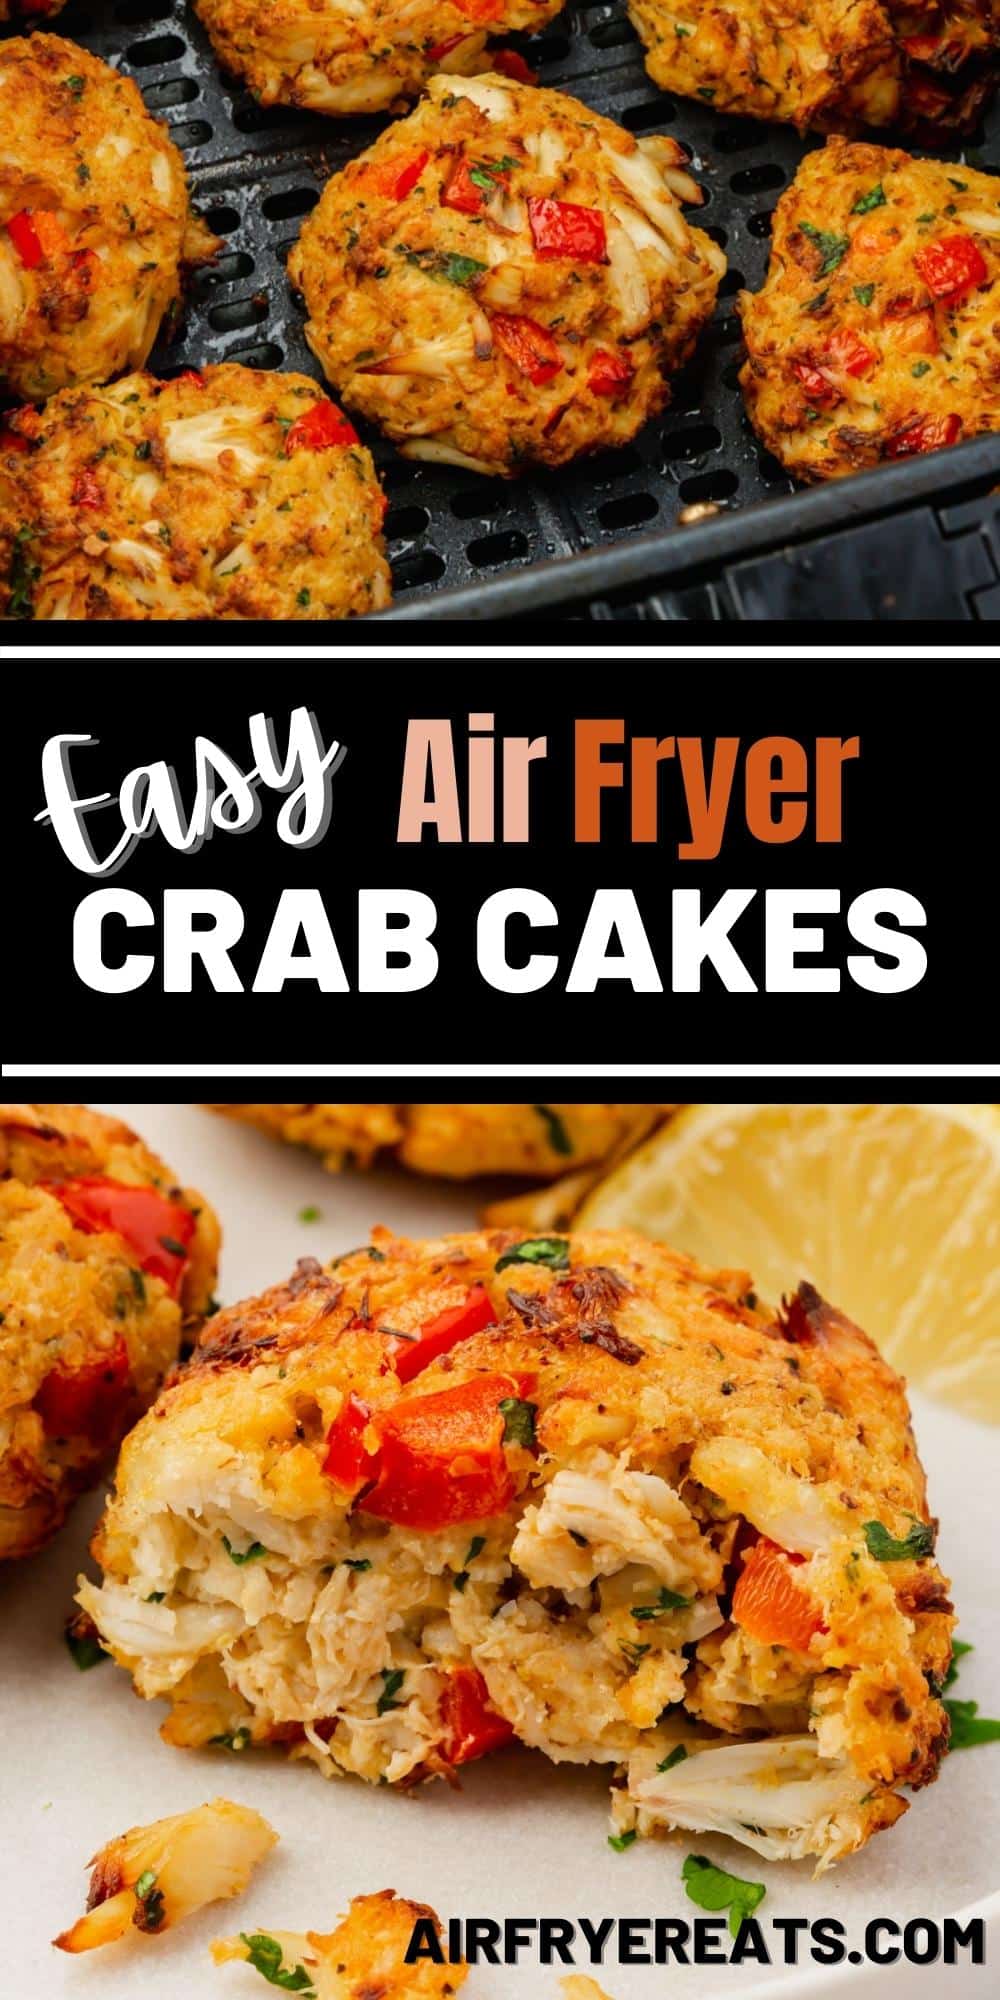 Turn fresh crab meat into the most juicy, delicious, golden brown crab cakes using the air fryer! Air Fryer Crab Cakes are easy to make, packed with flavor, and make the perfect appetizer or seafood lover's dinner. via @vegetarianmamma